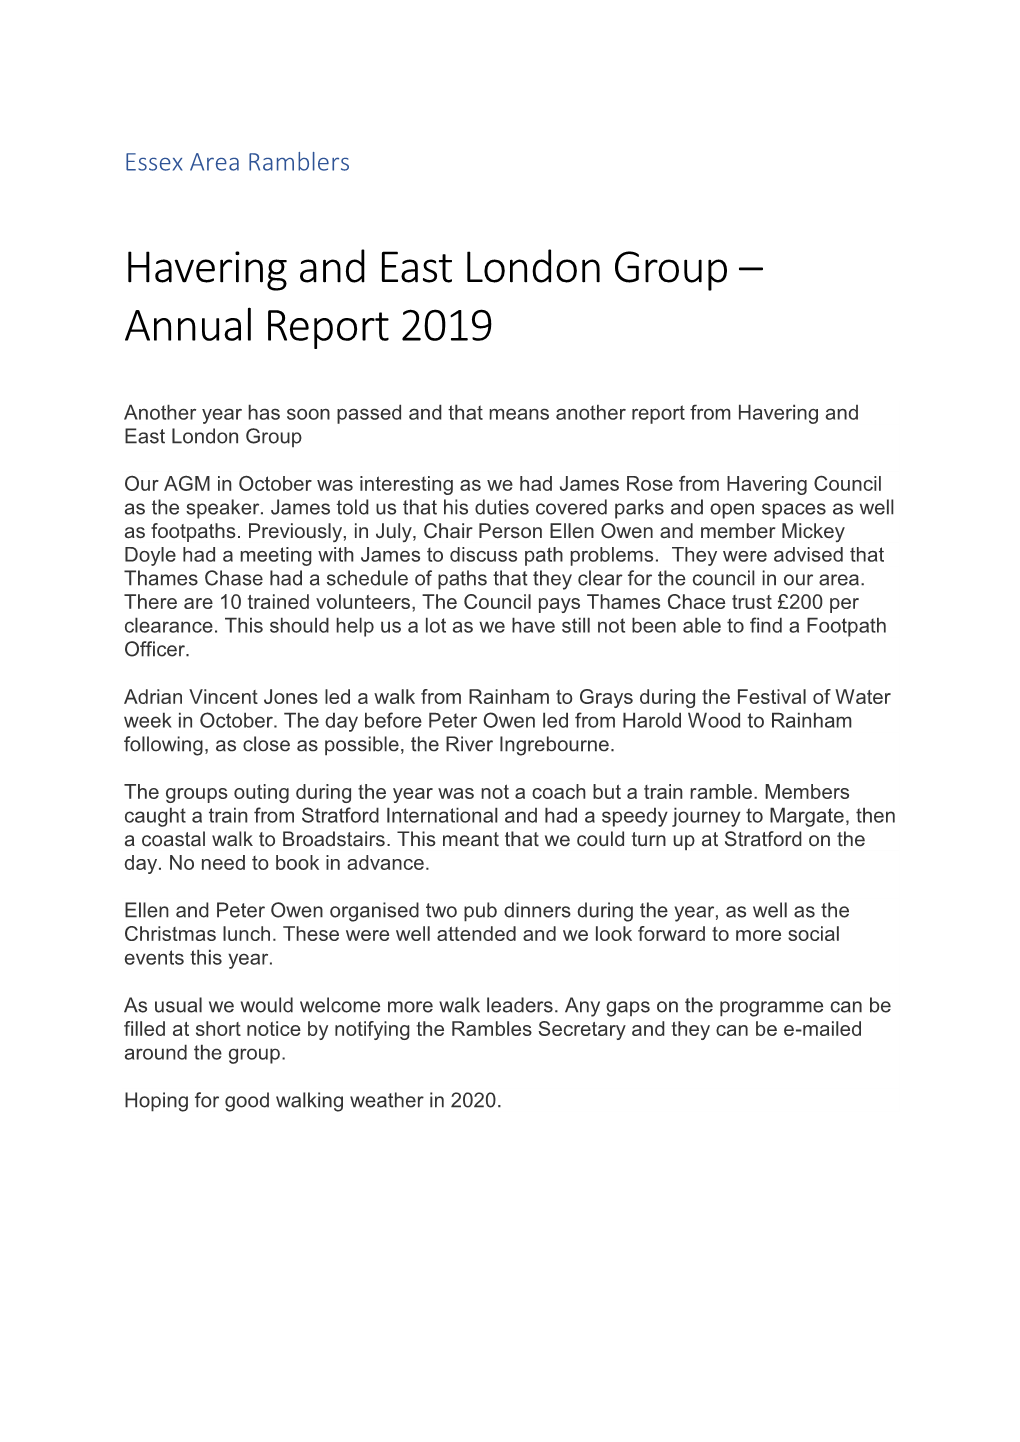 Havering and East London Group – Annual Report 2019